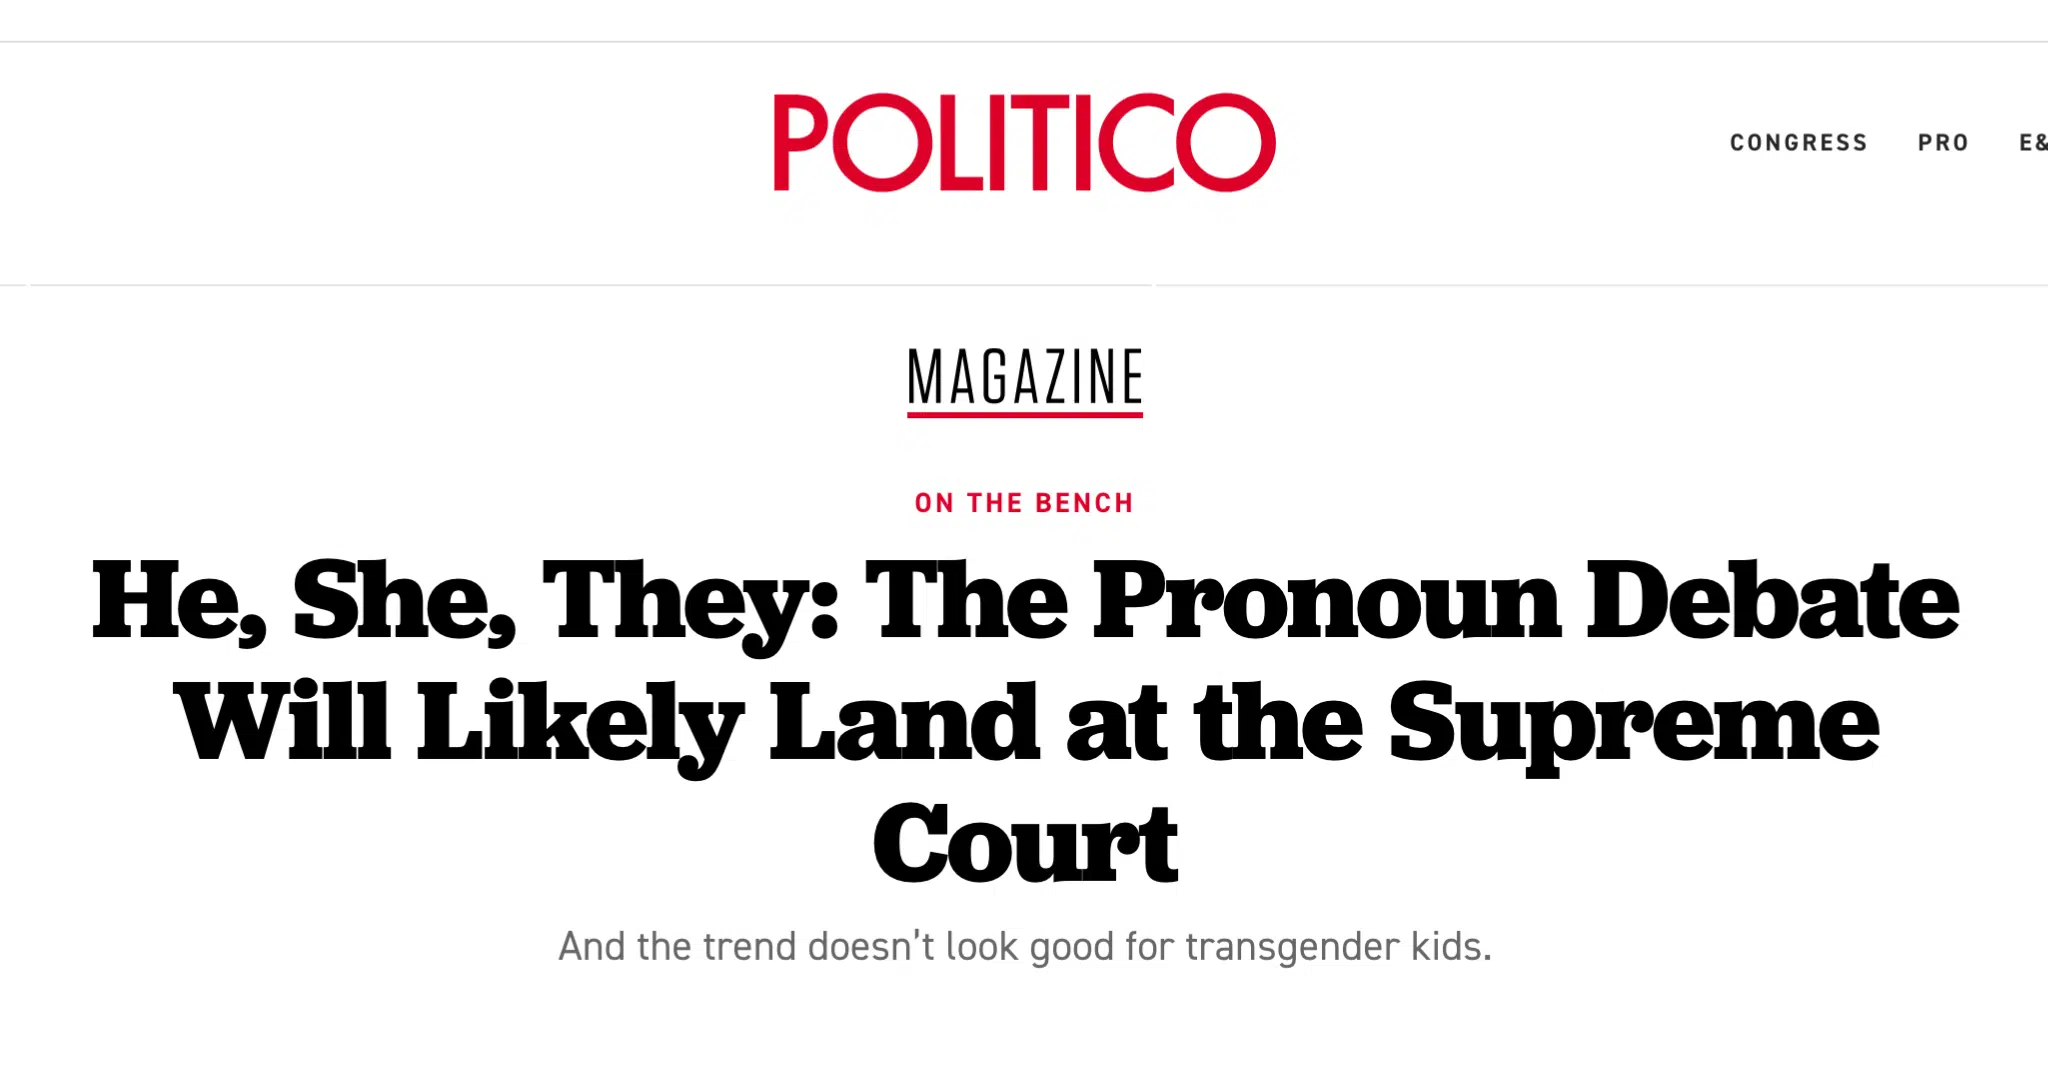 headline from Politico on the pronoun debate potentially reaching the supreme court